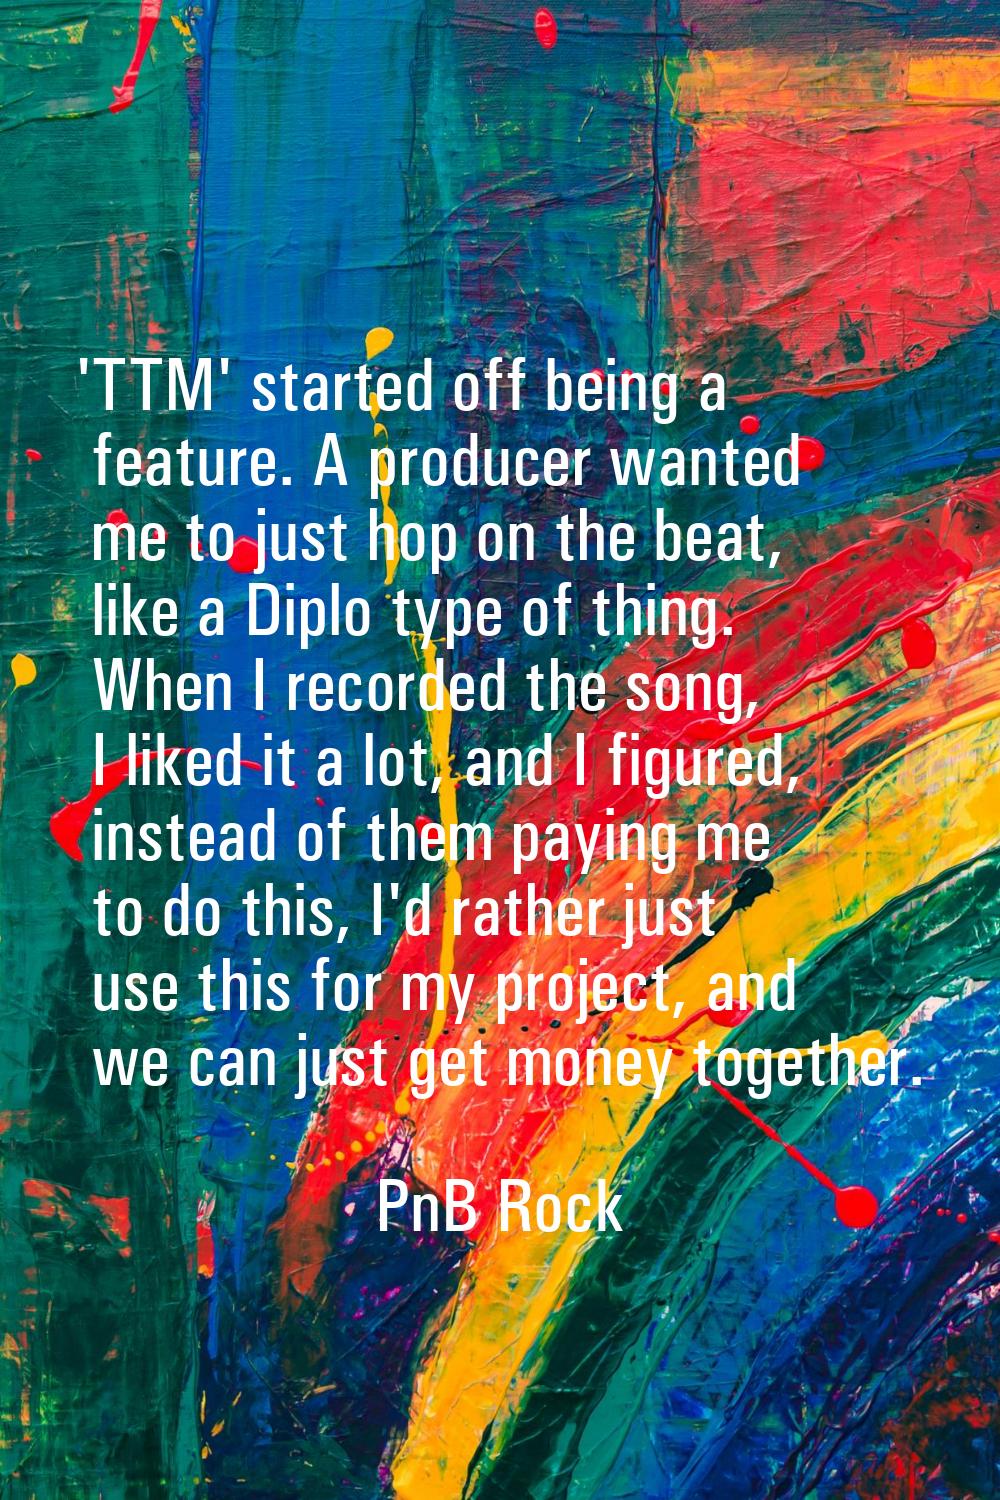 'TTM' started off being a feature. A producer wanted me to just hop on the beat, like a Diplo type 